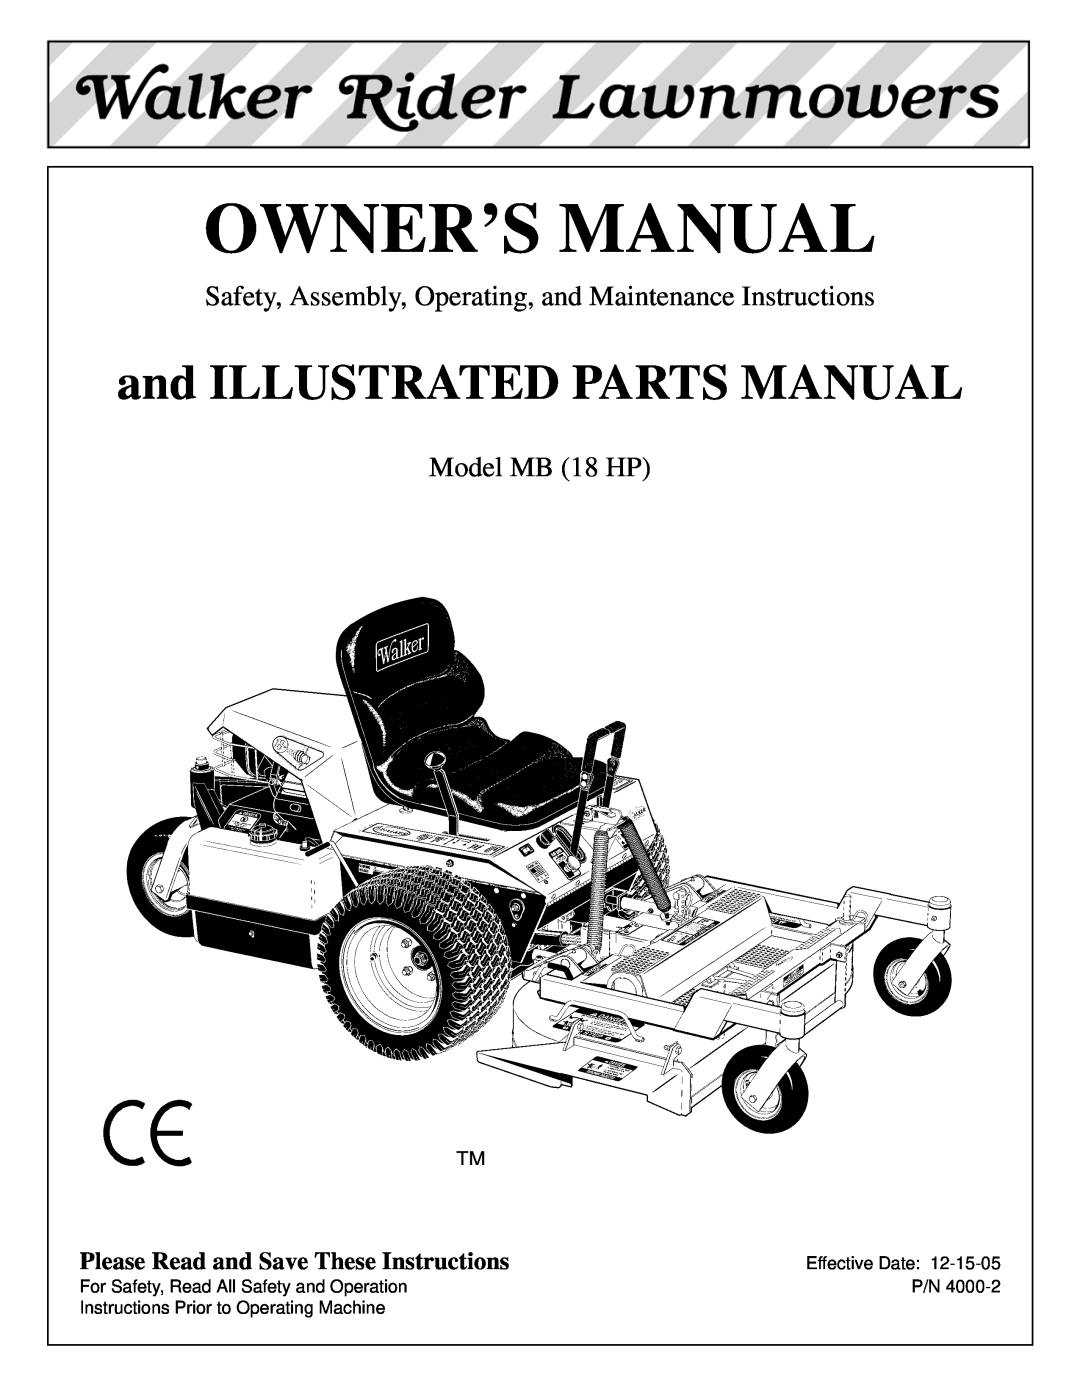 Briggs & Stratton MB (18 HP) owner manual Please Read and Save These Instructions, Owner’S Manual, Model MB 18 HP 